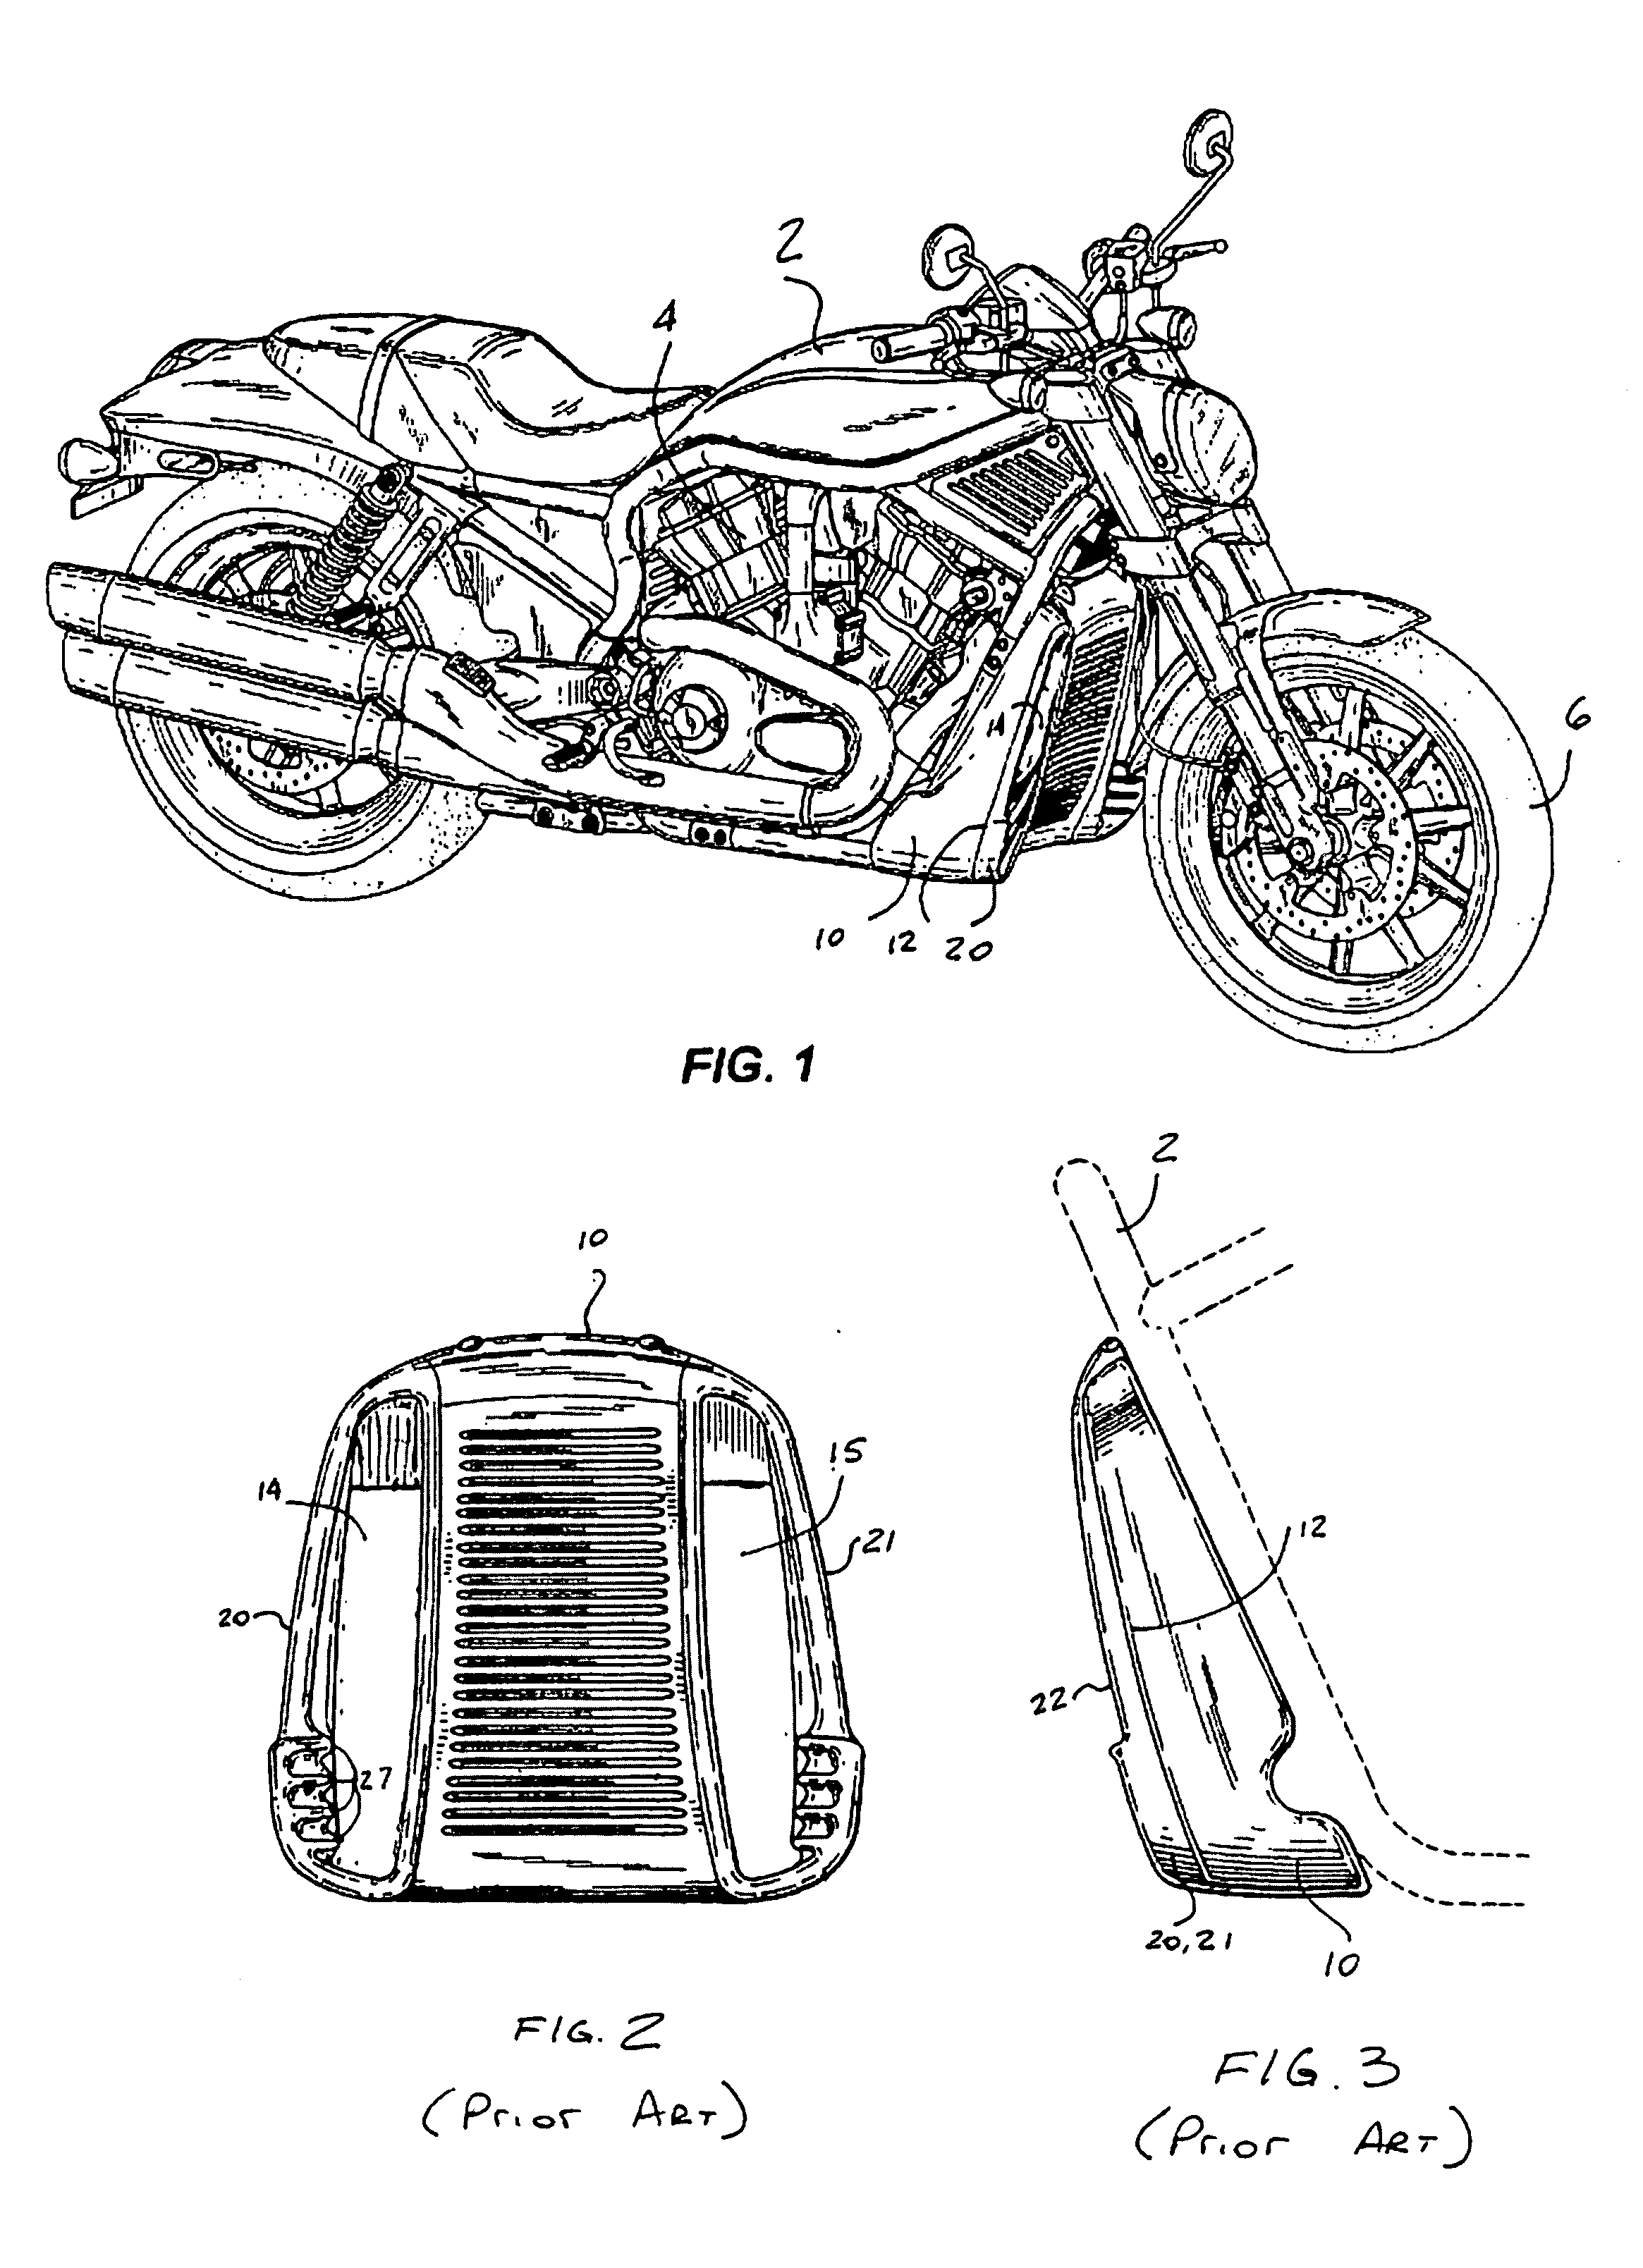 Grille for a motorcycle radiator cover